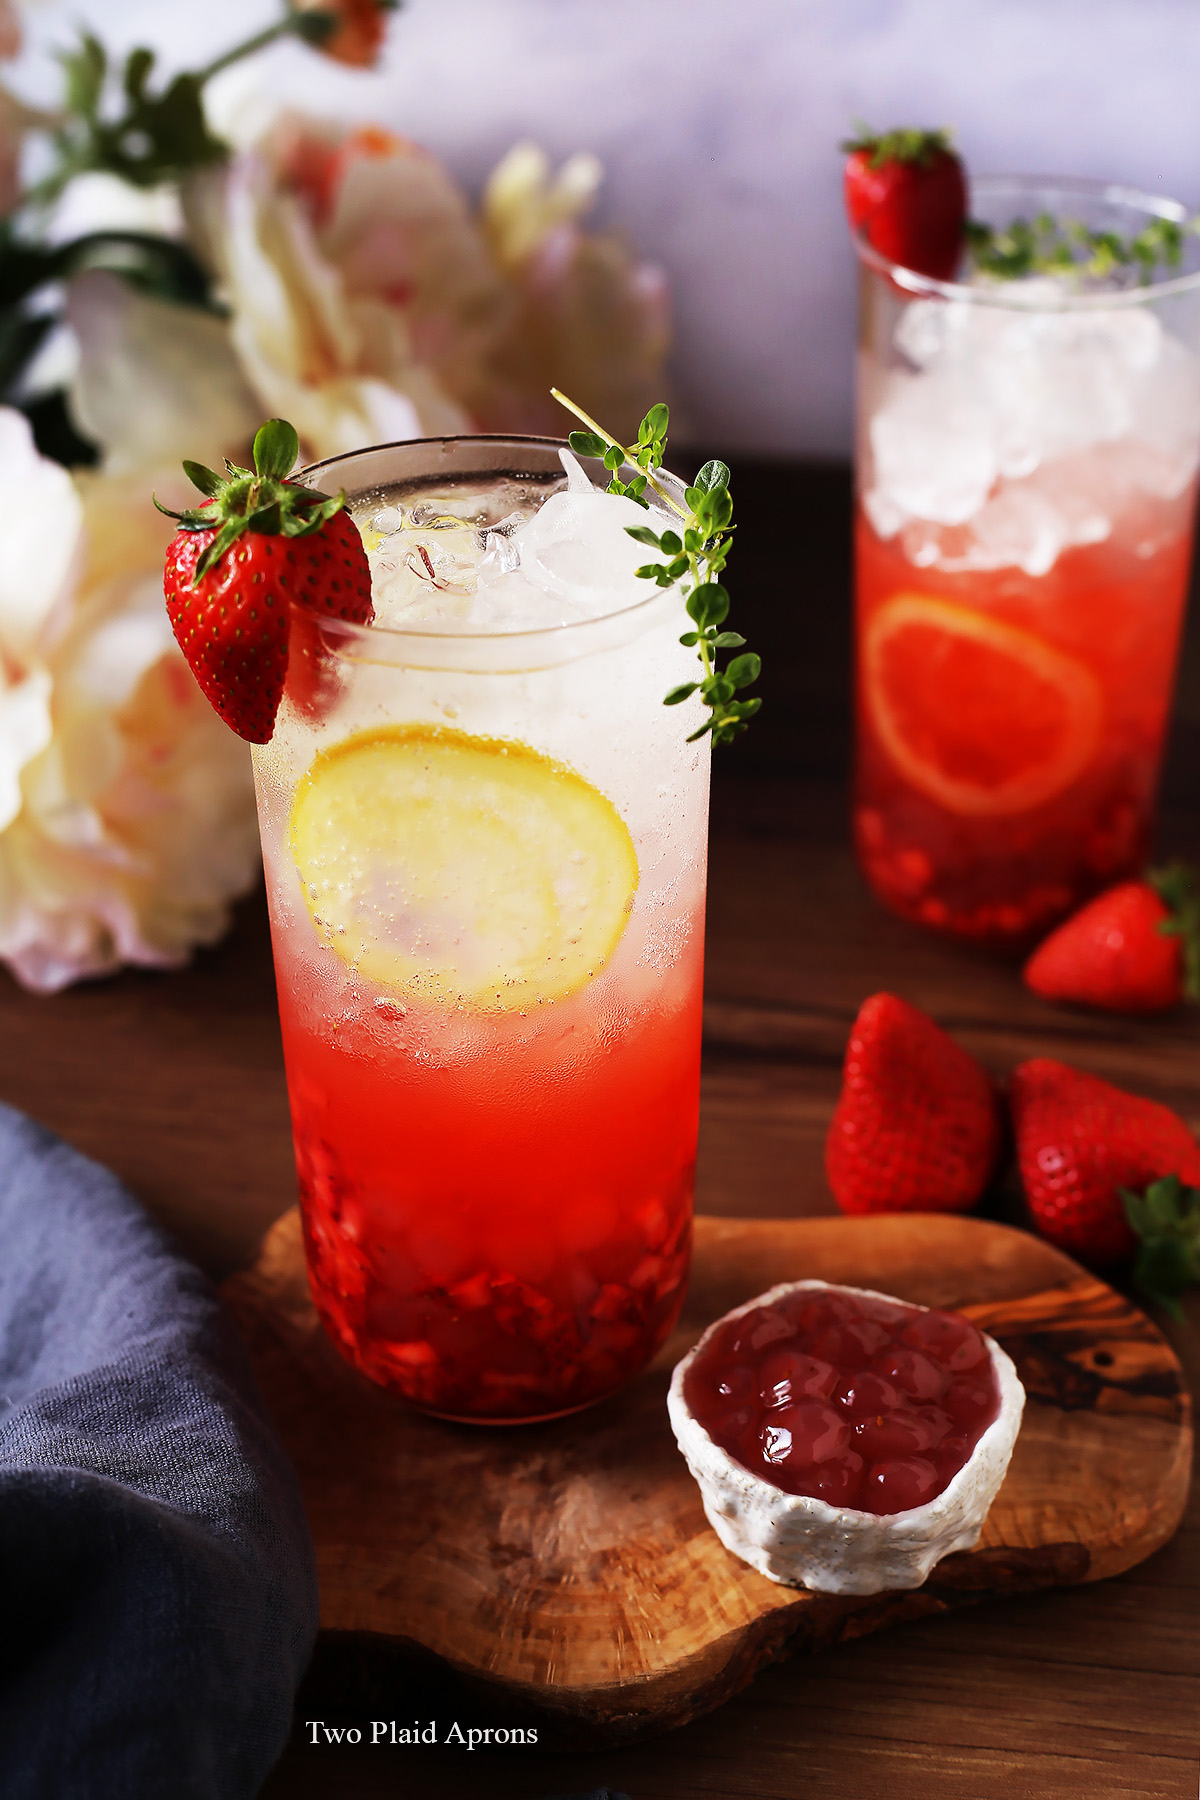 Front angled view of a tall glass of the sparkling strawberry lemonade with a small bowl of strawberry bobas.